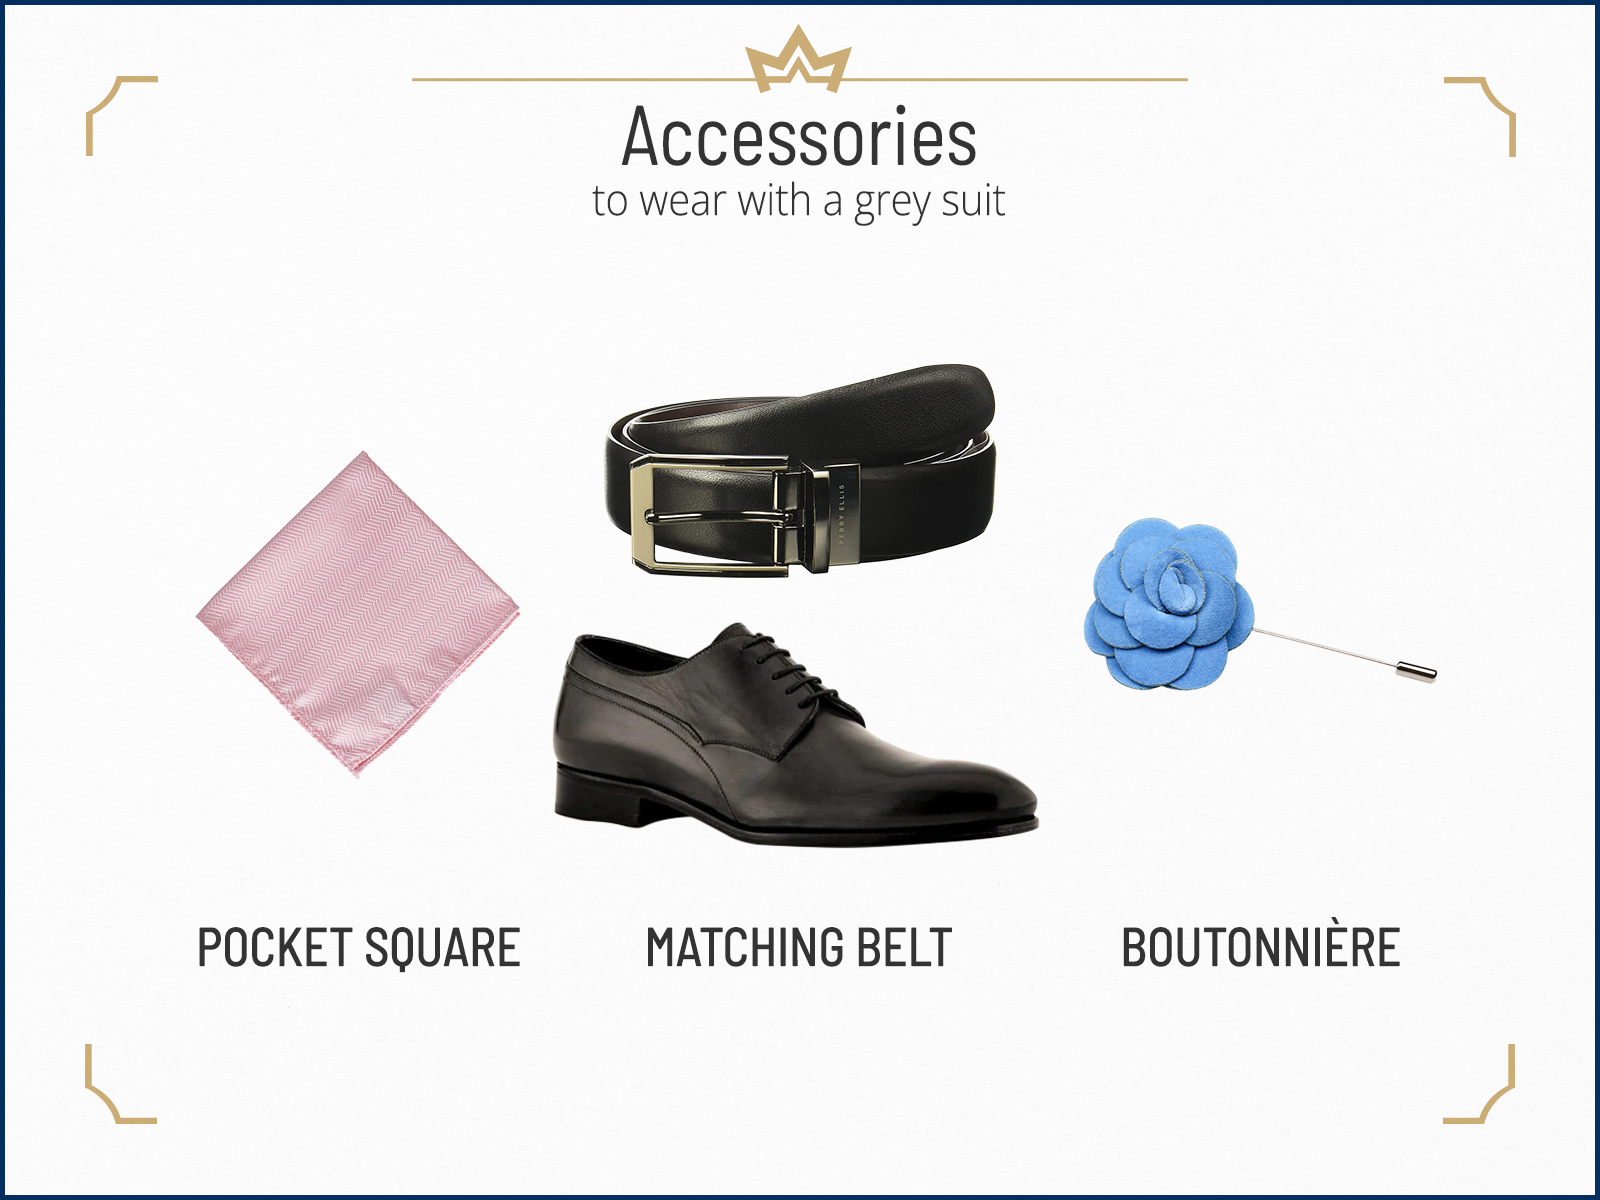 Recommended accessories to wear with grey suits